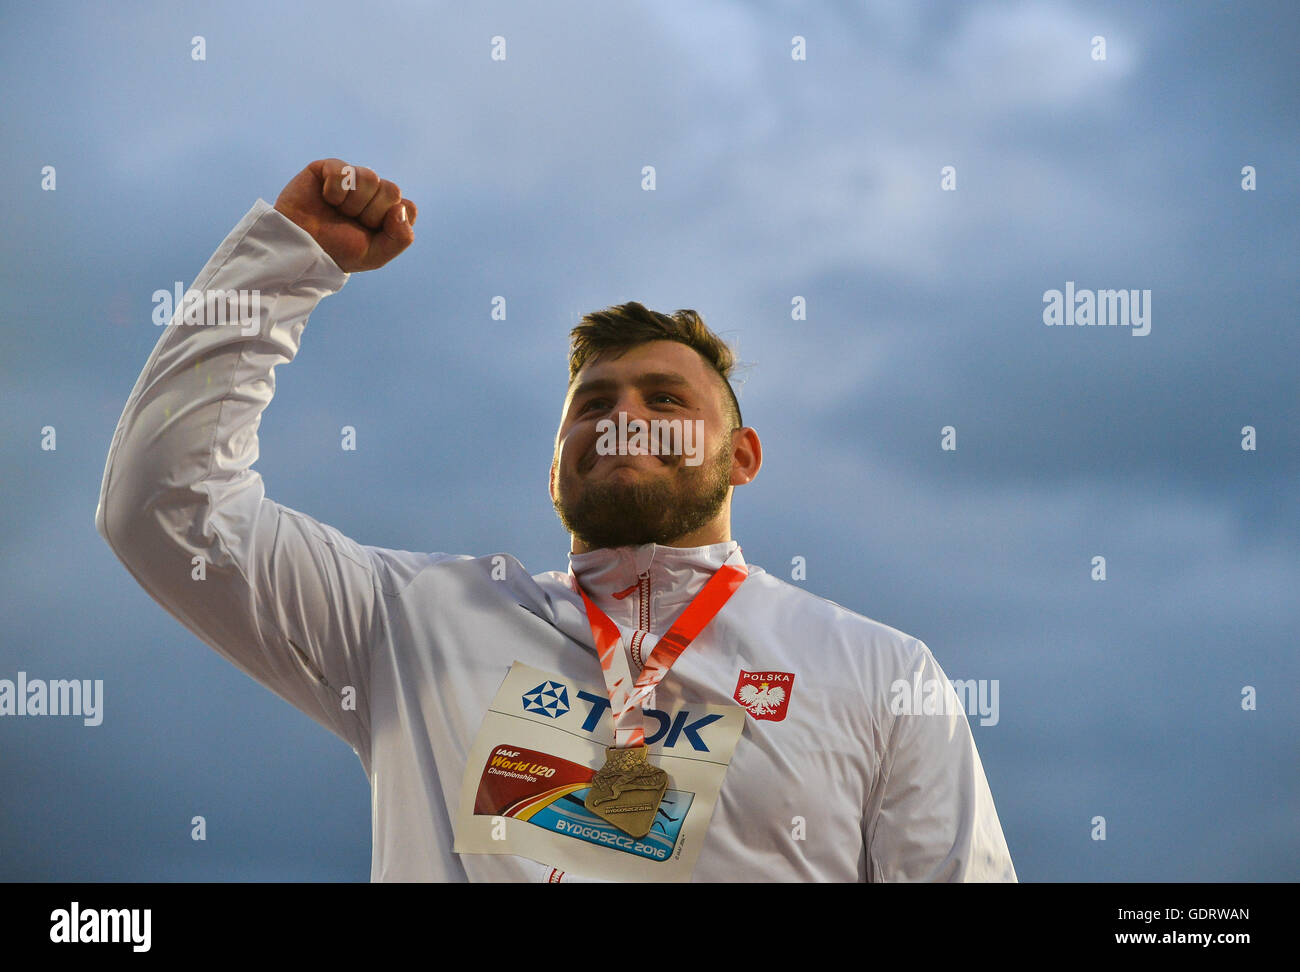 Bydgoszcz, Poland. 19th July, 2016. Konrad Bukowiecki of Poland with his gold medal during the afternoon session on day 1 of the IAAF World Junior Championships at Zawisza Stadium on July 19, 2016 in Bydgoszcz, Poland. Credit:  Roger Sedres/Alamy Live News Stock Photo